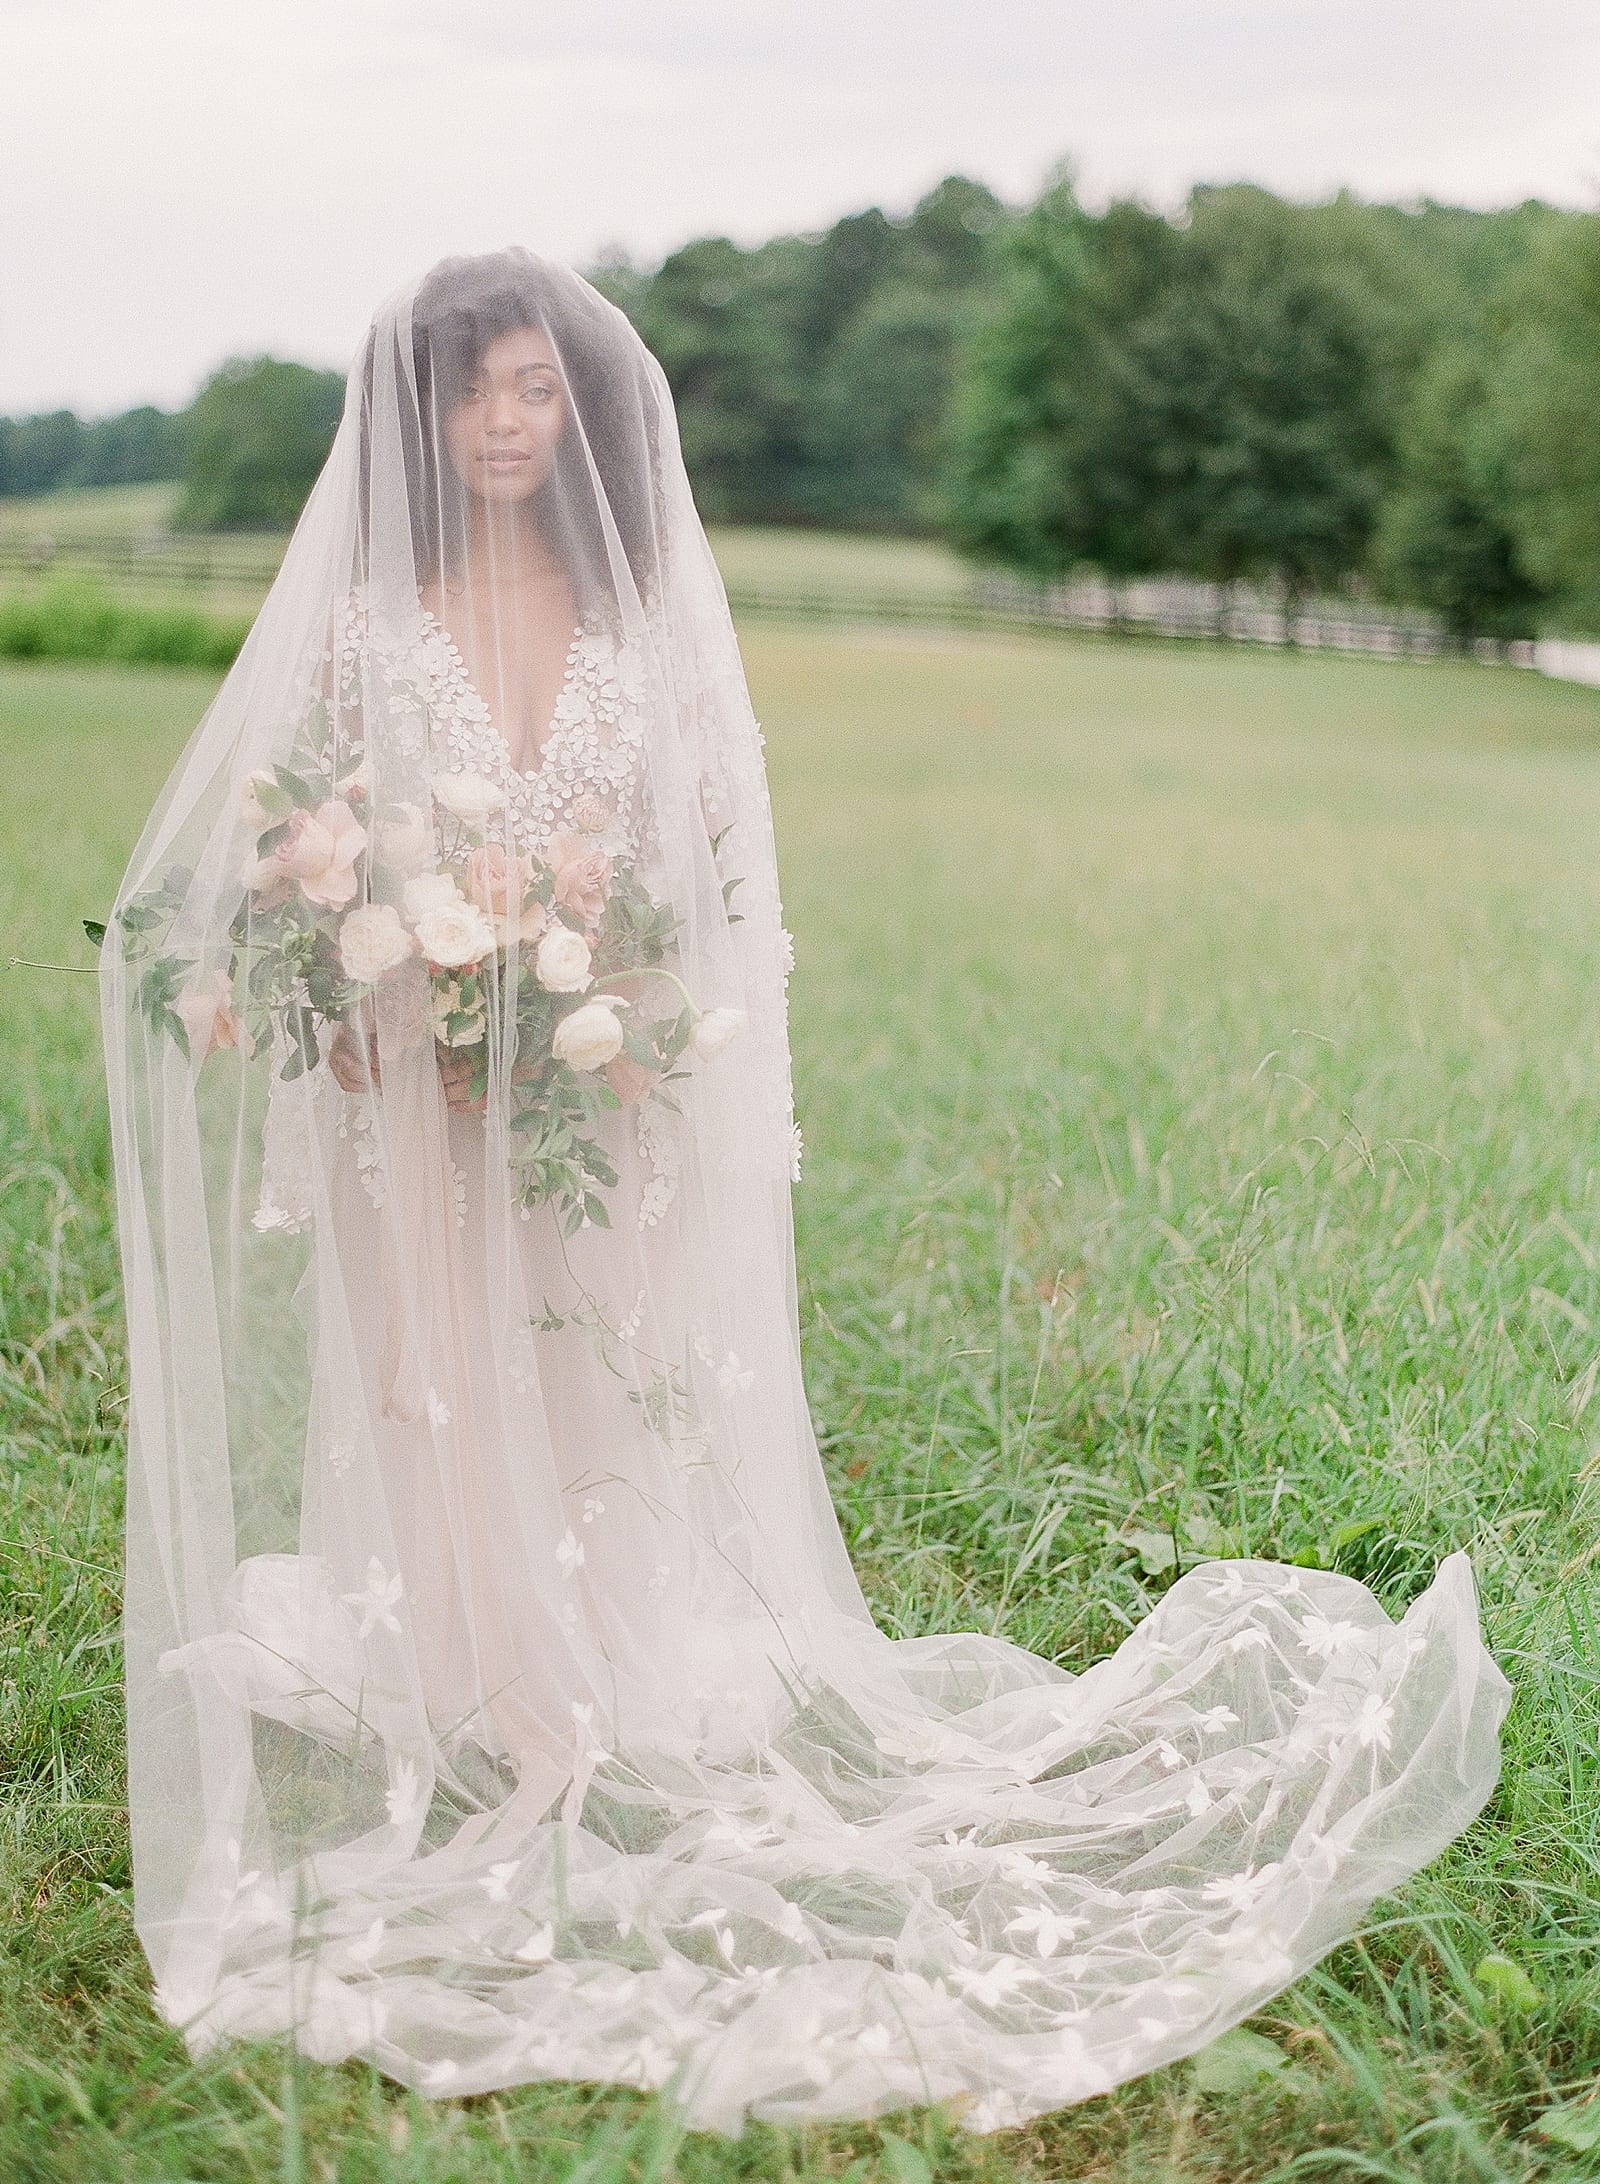 Bride with Veil over Face Photo